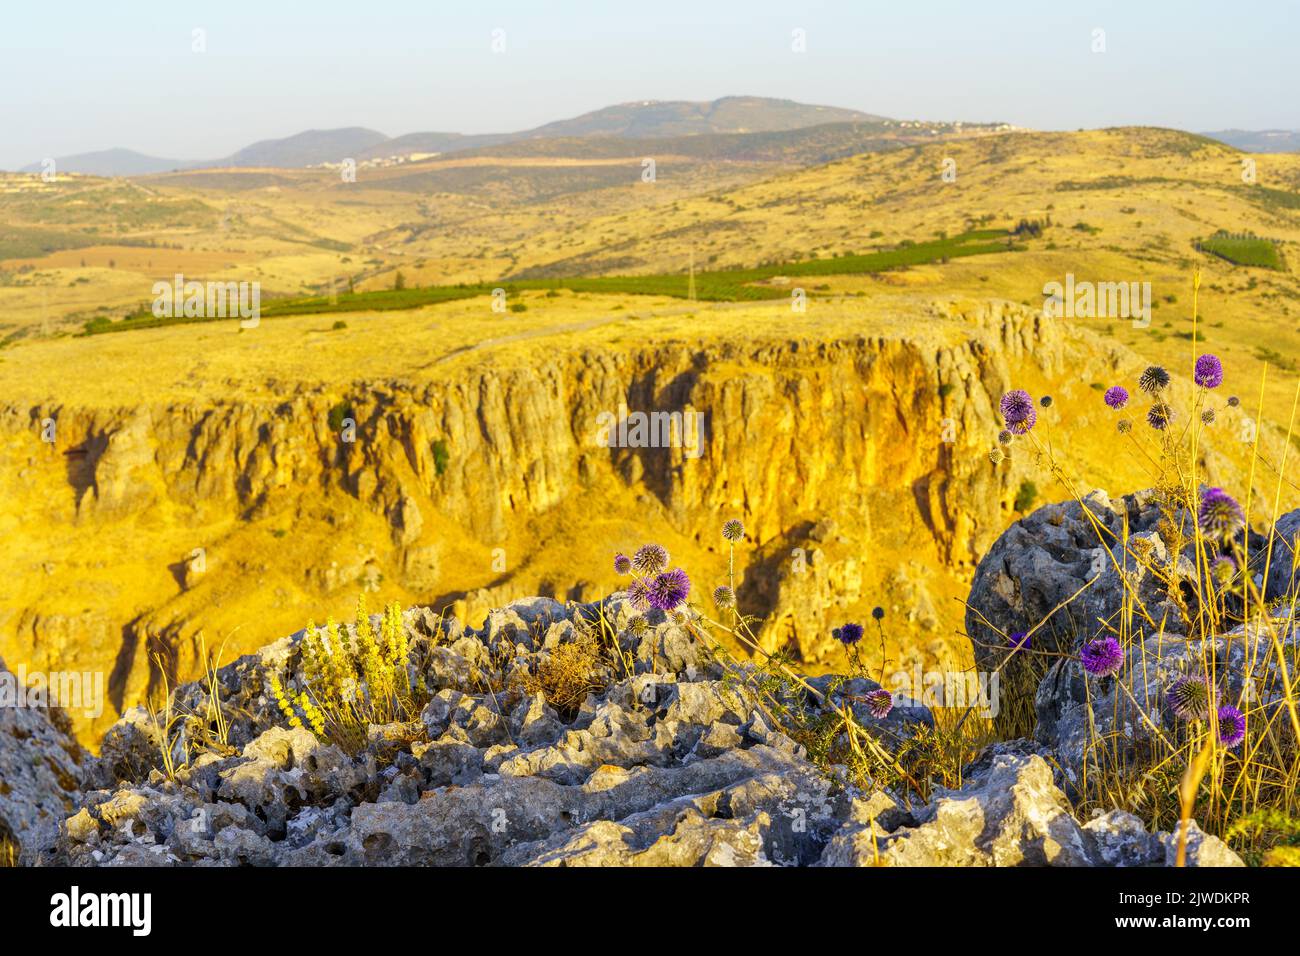 View of wildflowers and the cliffs of Mount Nitai in the background, in mount Arbel, Northern Israel Stock Photo